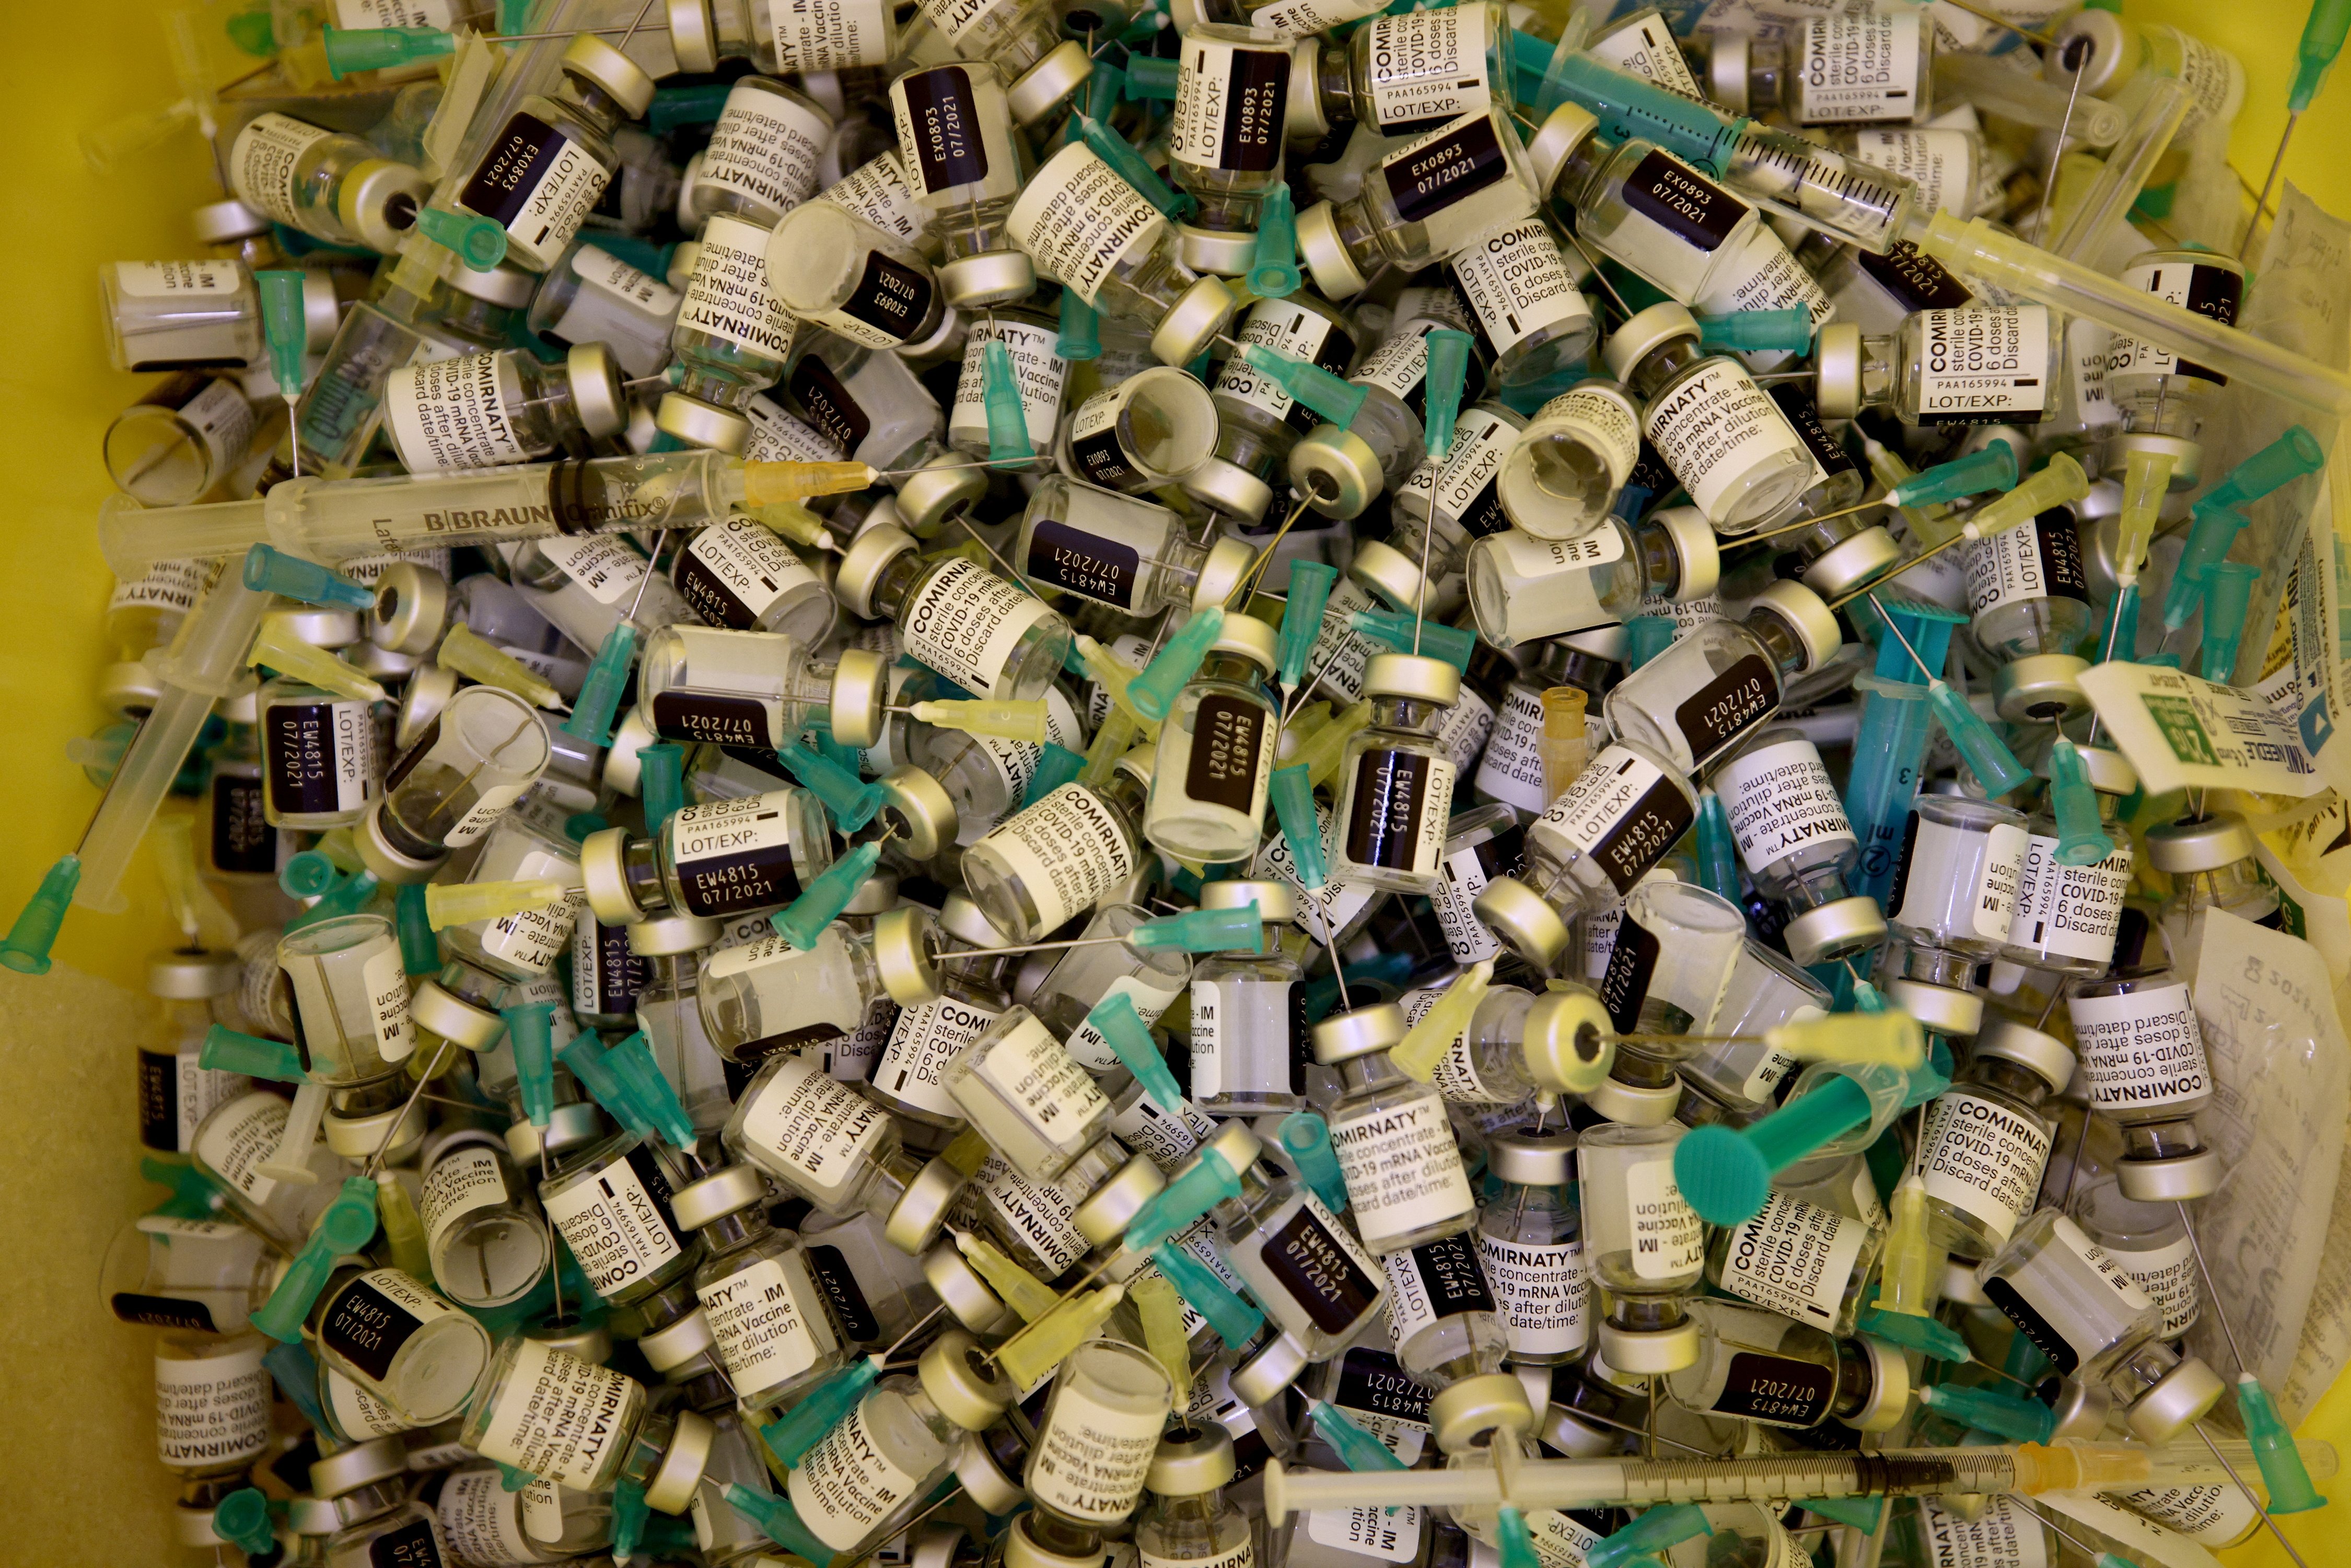 Empty Pfizer-BioNTech COVID-19 vaccine vials and syringes collect in a disposal container at Austria Center, which has been set up as a coronavirus mass vaccination center, Vienna, Austria, April 22, 2021. (Rueters Photo)